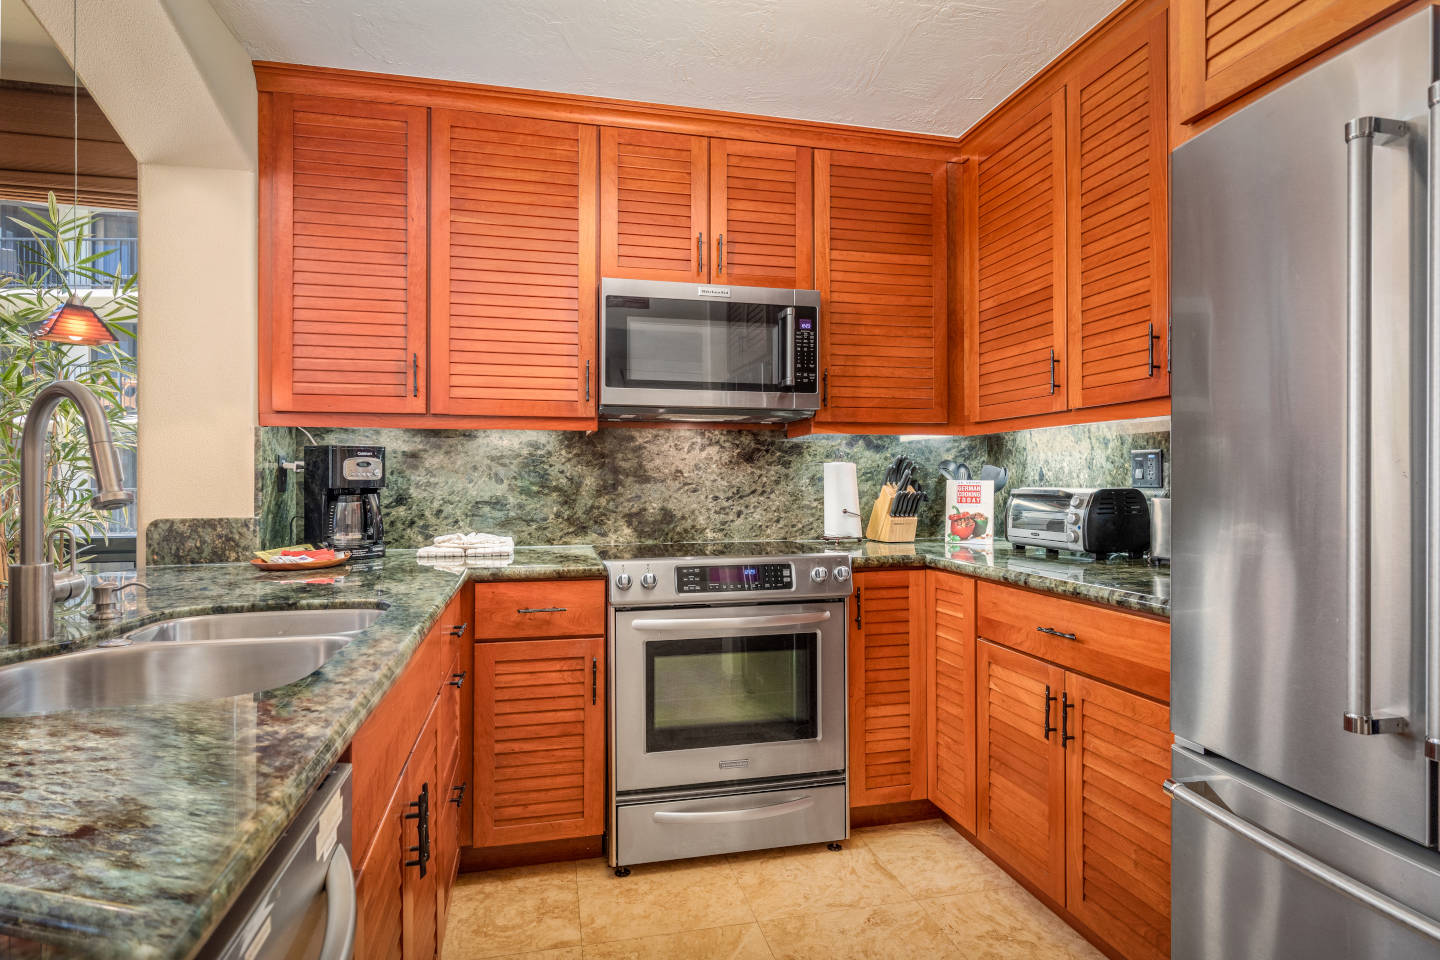 Beautiful spacious updated kitchen with full-size appliances, stove/oven and a microwave above the stovetop, refrigerator and coffee maker and toaster oven on the marble countertop